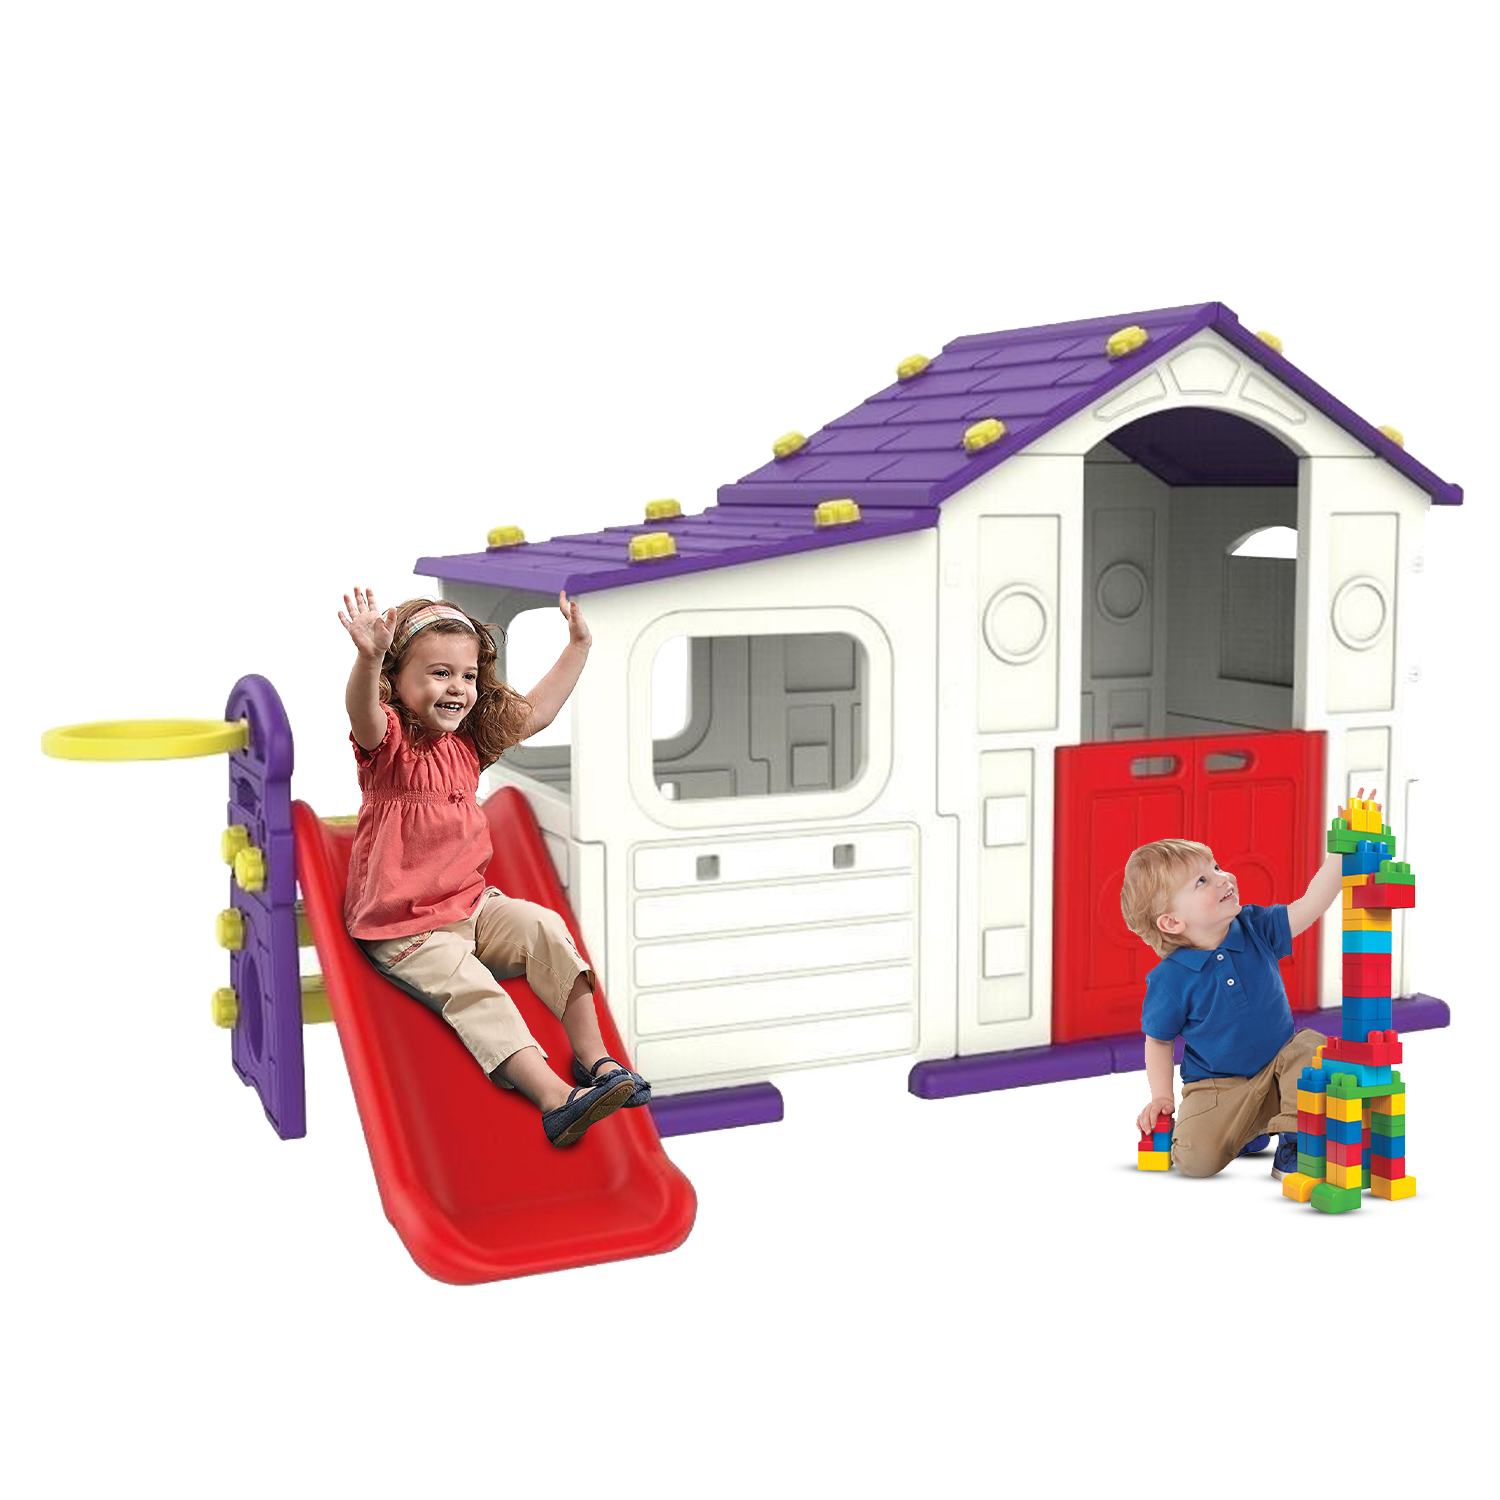 Megastar - Double Fun Indigo Playhouse With Play Shed & Hoops, Slide - Violet Red White